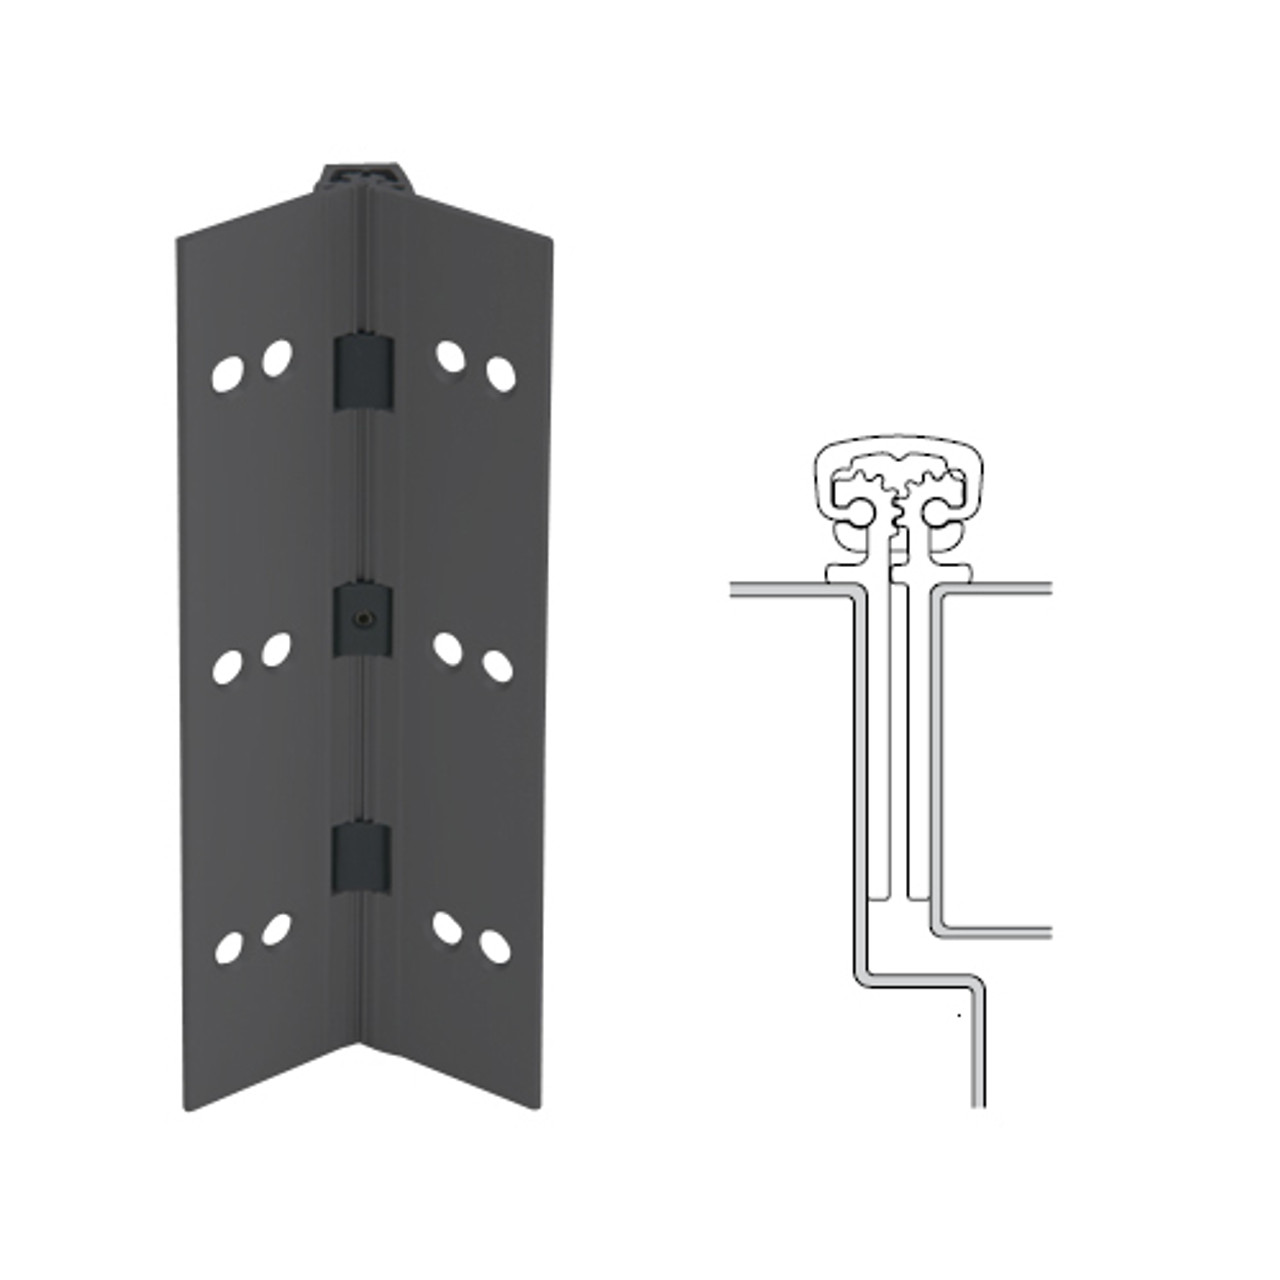 112XY-315AN-85-TEKWD IVES Full Mortise Continuous Geared Hinges with Wood Screws in Anodized Black